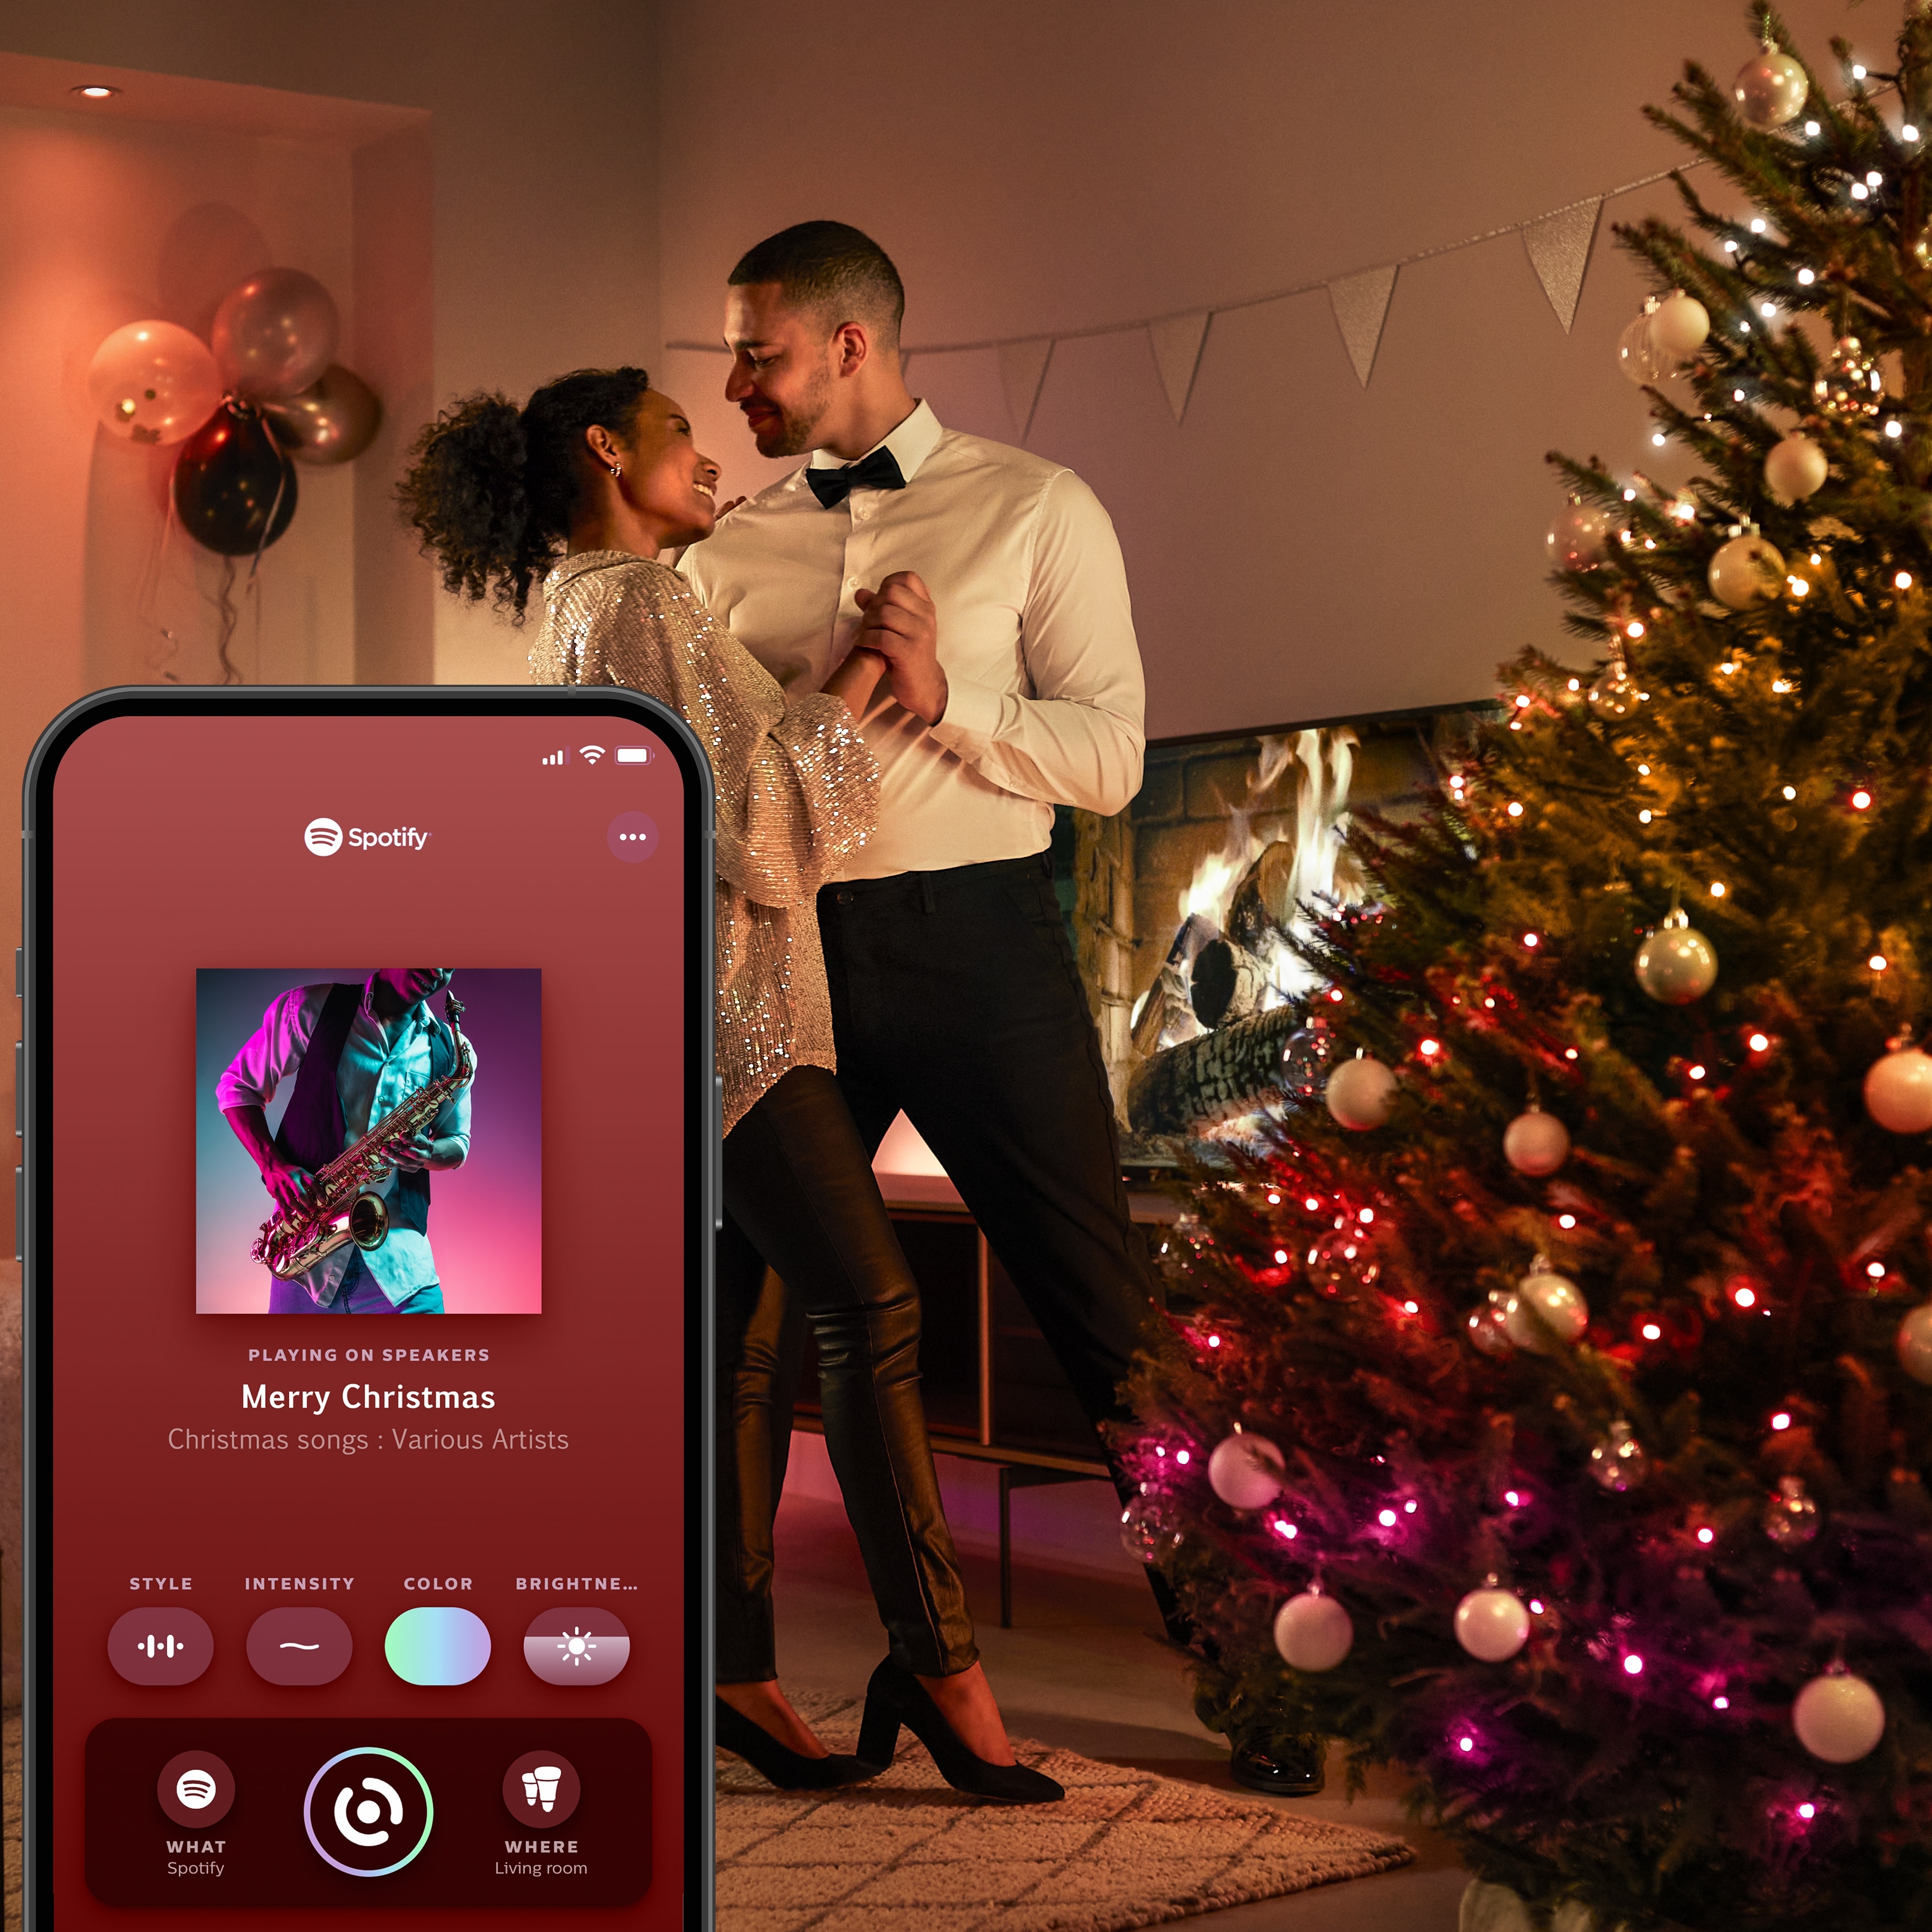 Hue | for lights Festavia holidays Philips Signify the string Website Company